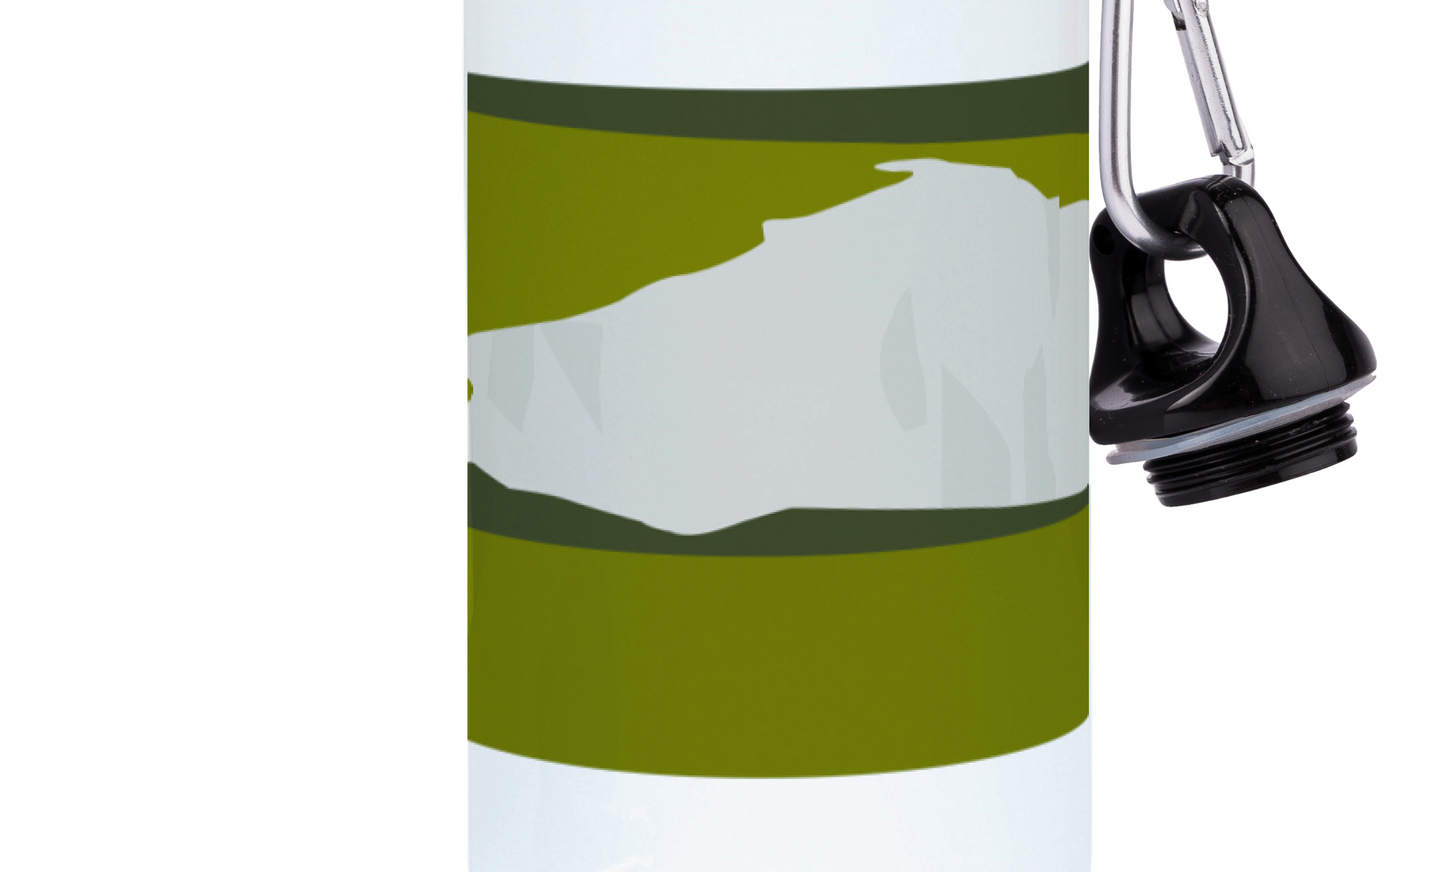 Aluminum bottle "Golf at the Seven Sisters" - Customizable